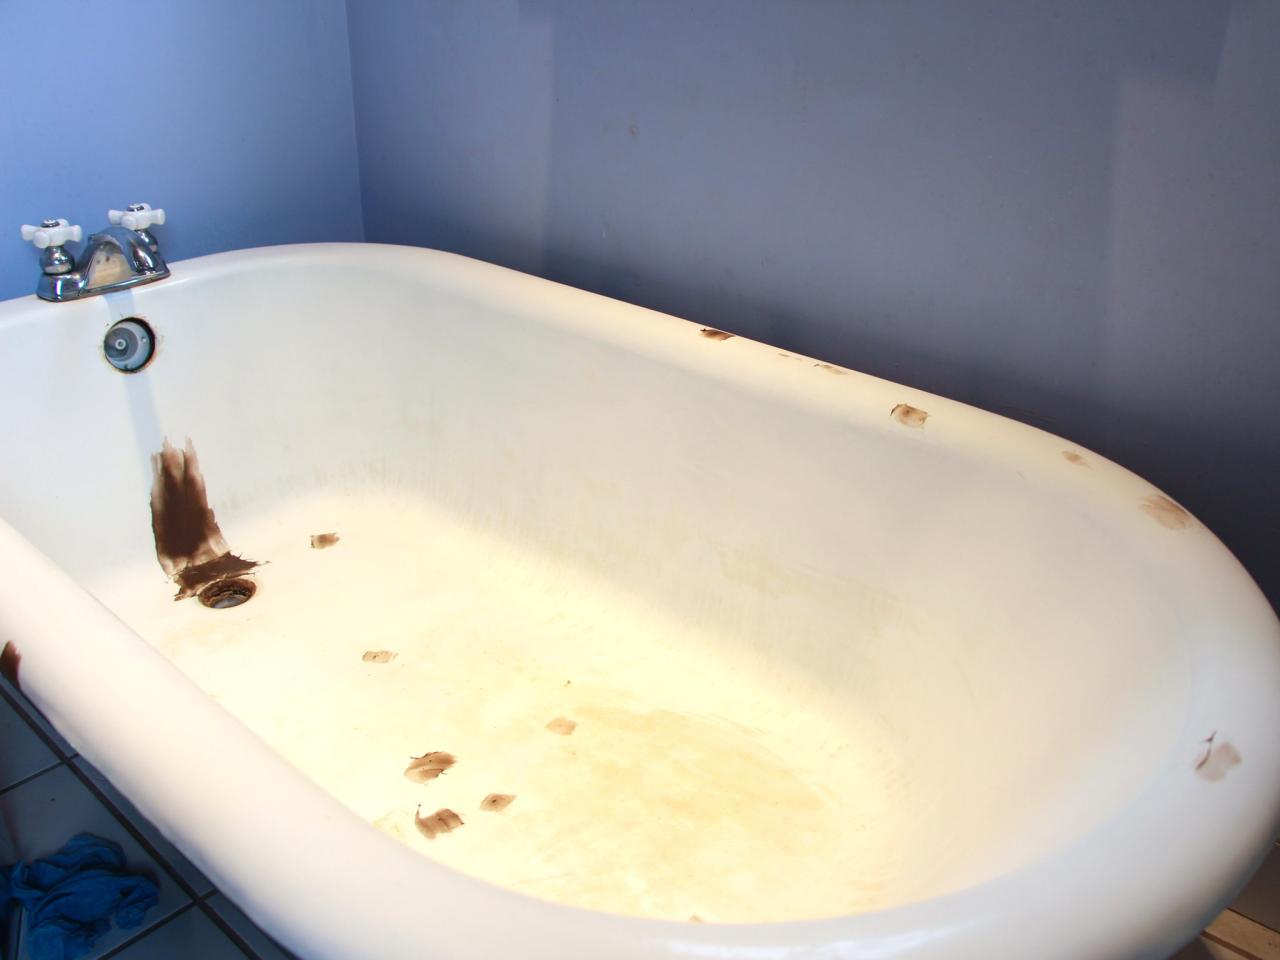 How To Refinish A Bathtub Tos Diy, How To Remove Chipped Paint From Bathtub